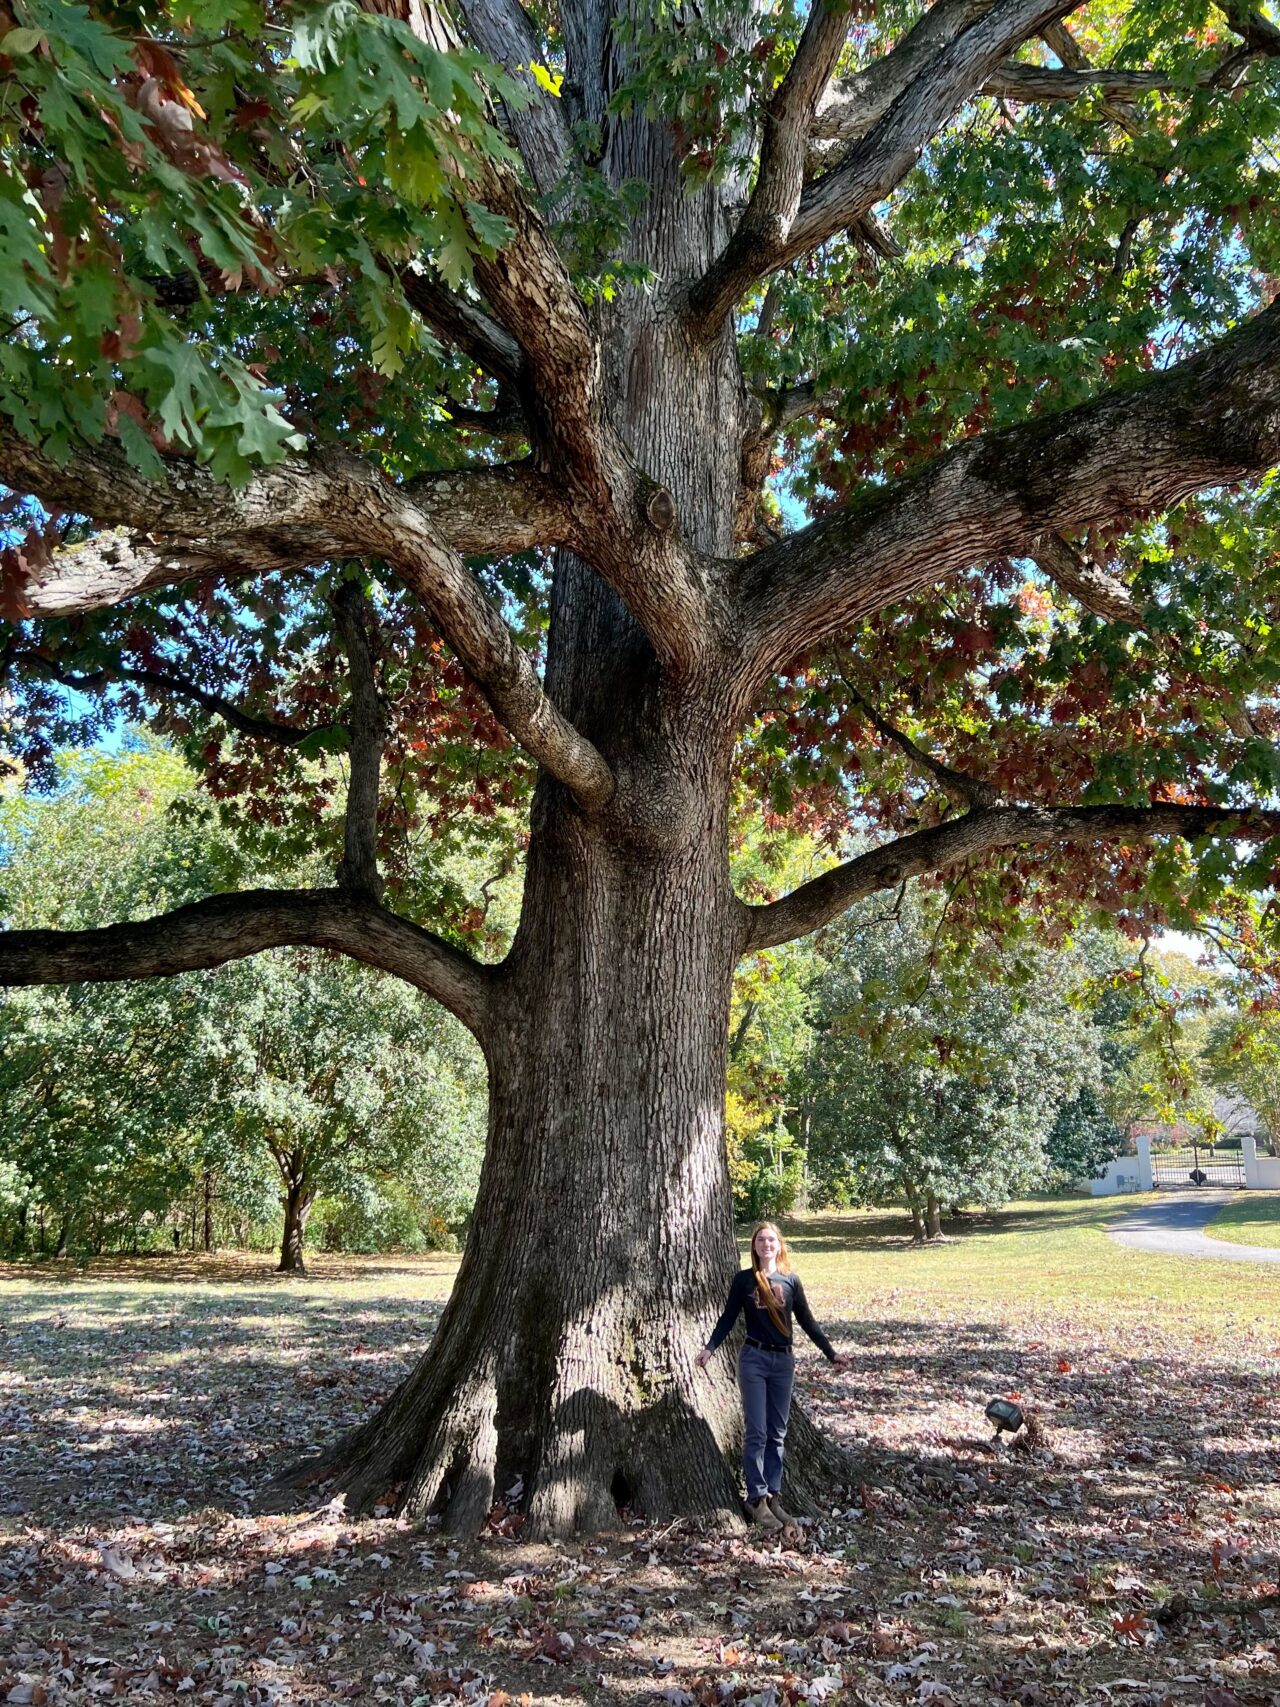 Victorson collects acorns from the largest white oak in Davidson County, Tenn. She notes that large trees, especially Champion Trees, are usually the best candidates for collecting healthy acorns. Photo courtesy of Erin Victorson